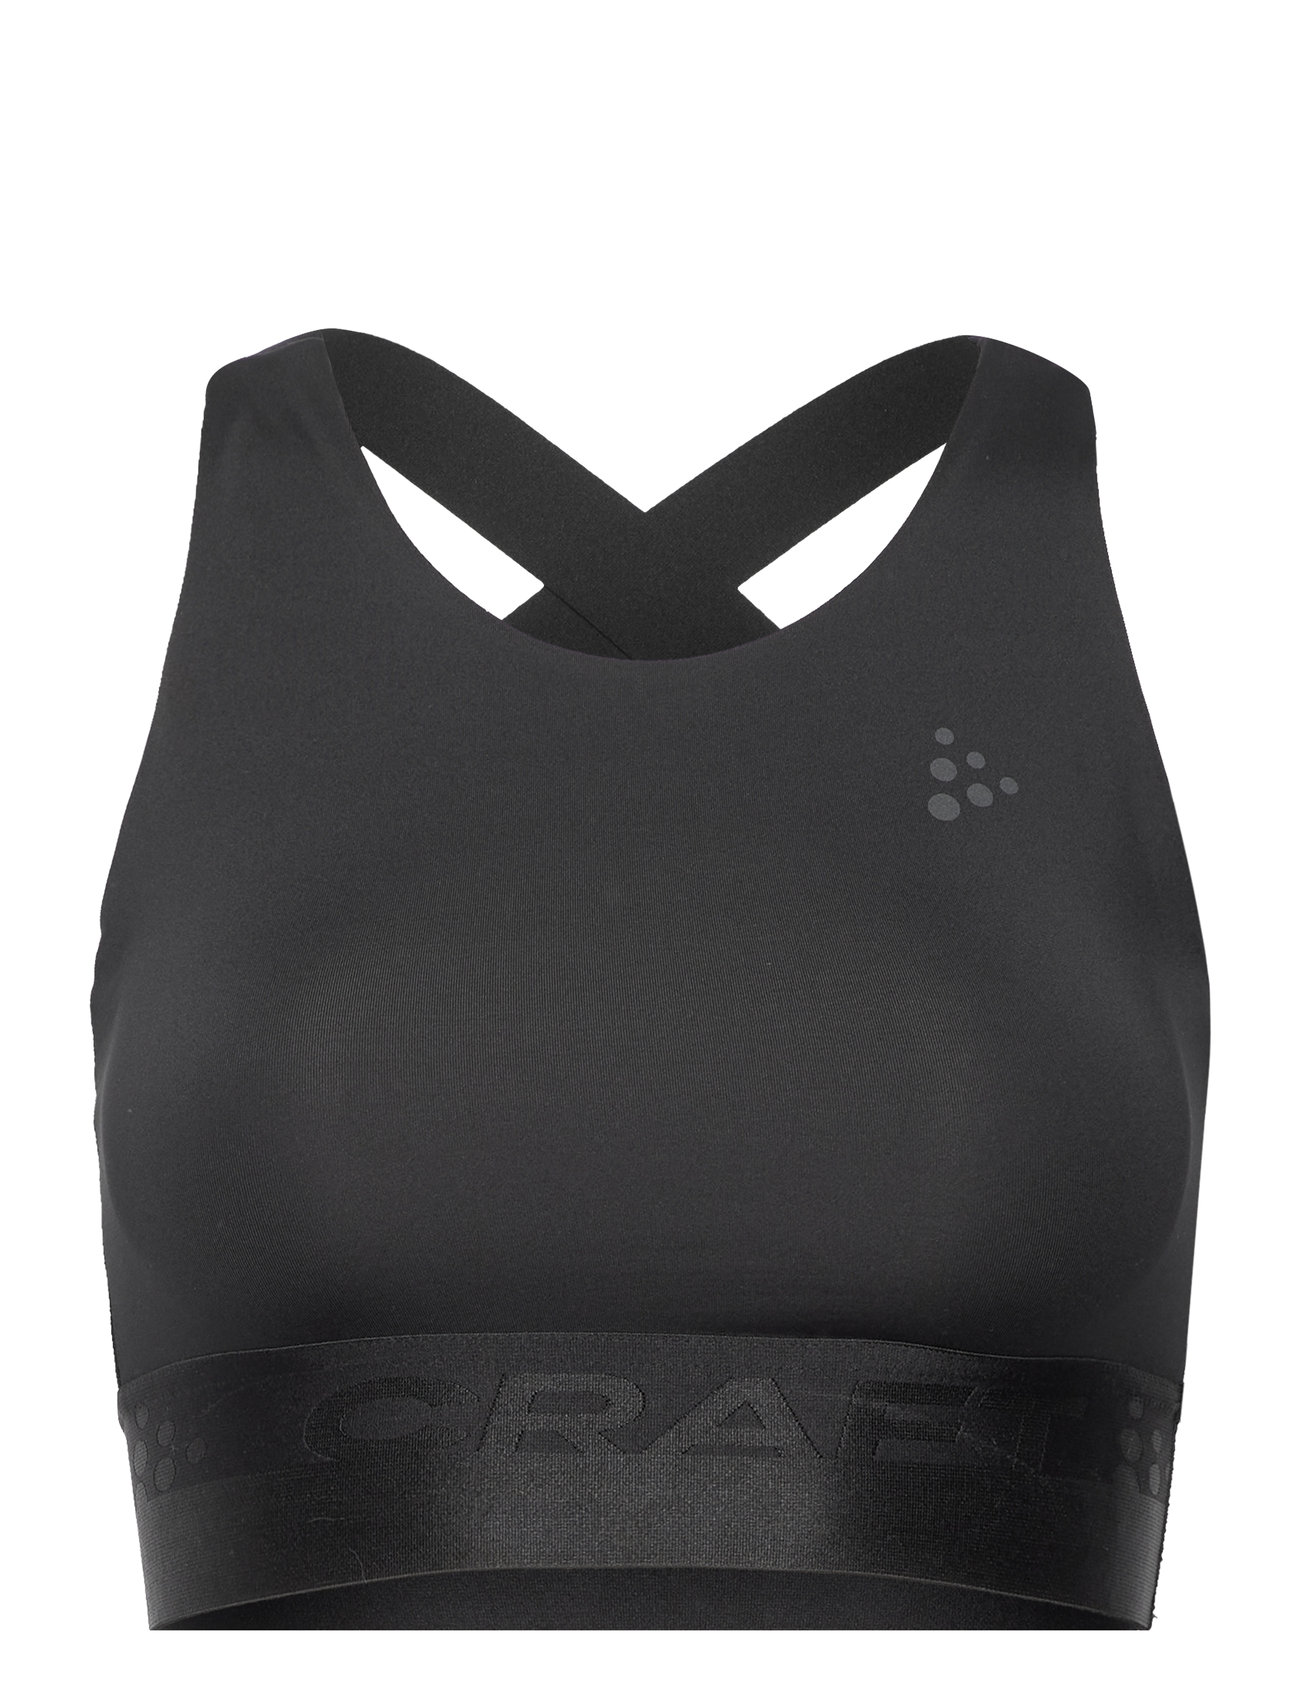 Core Charge Sport Top W Sport Bras & Tops Sports Bras - All Black Craft